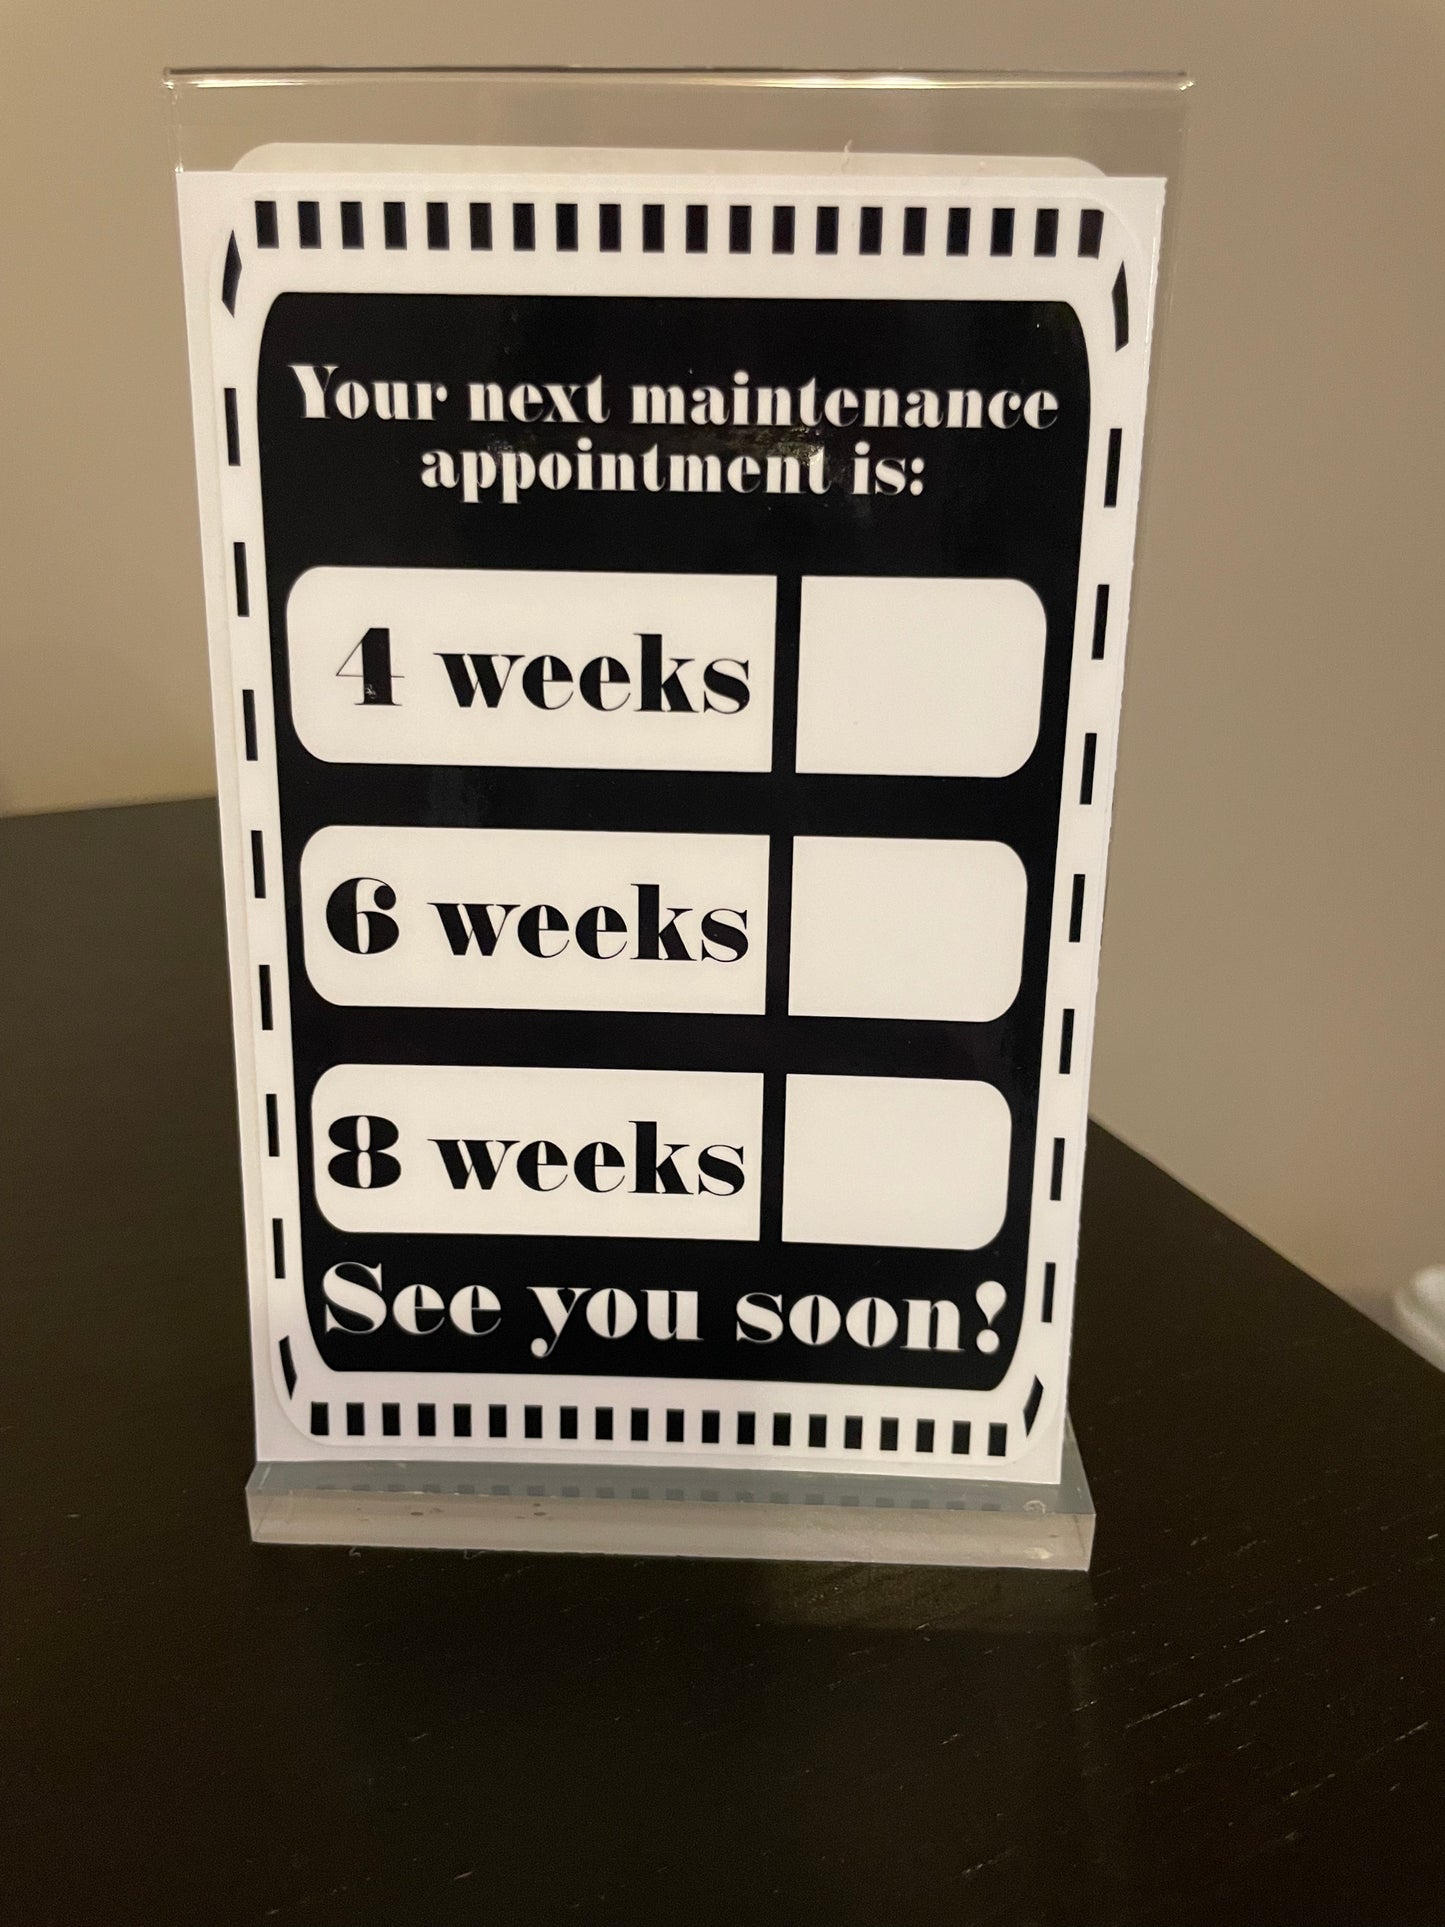 Client appointment reminder clings.